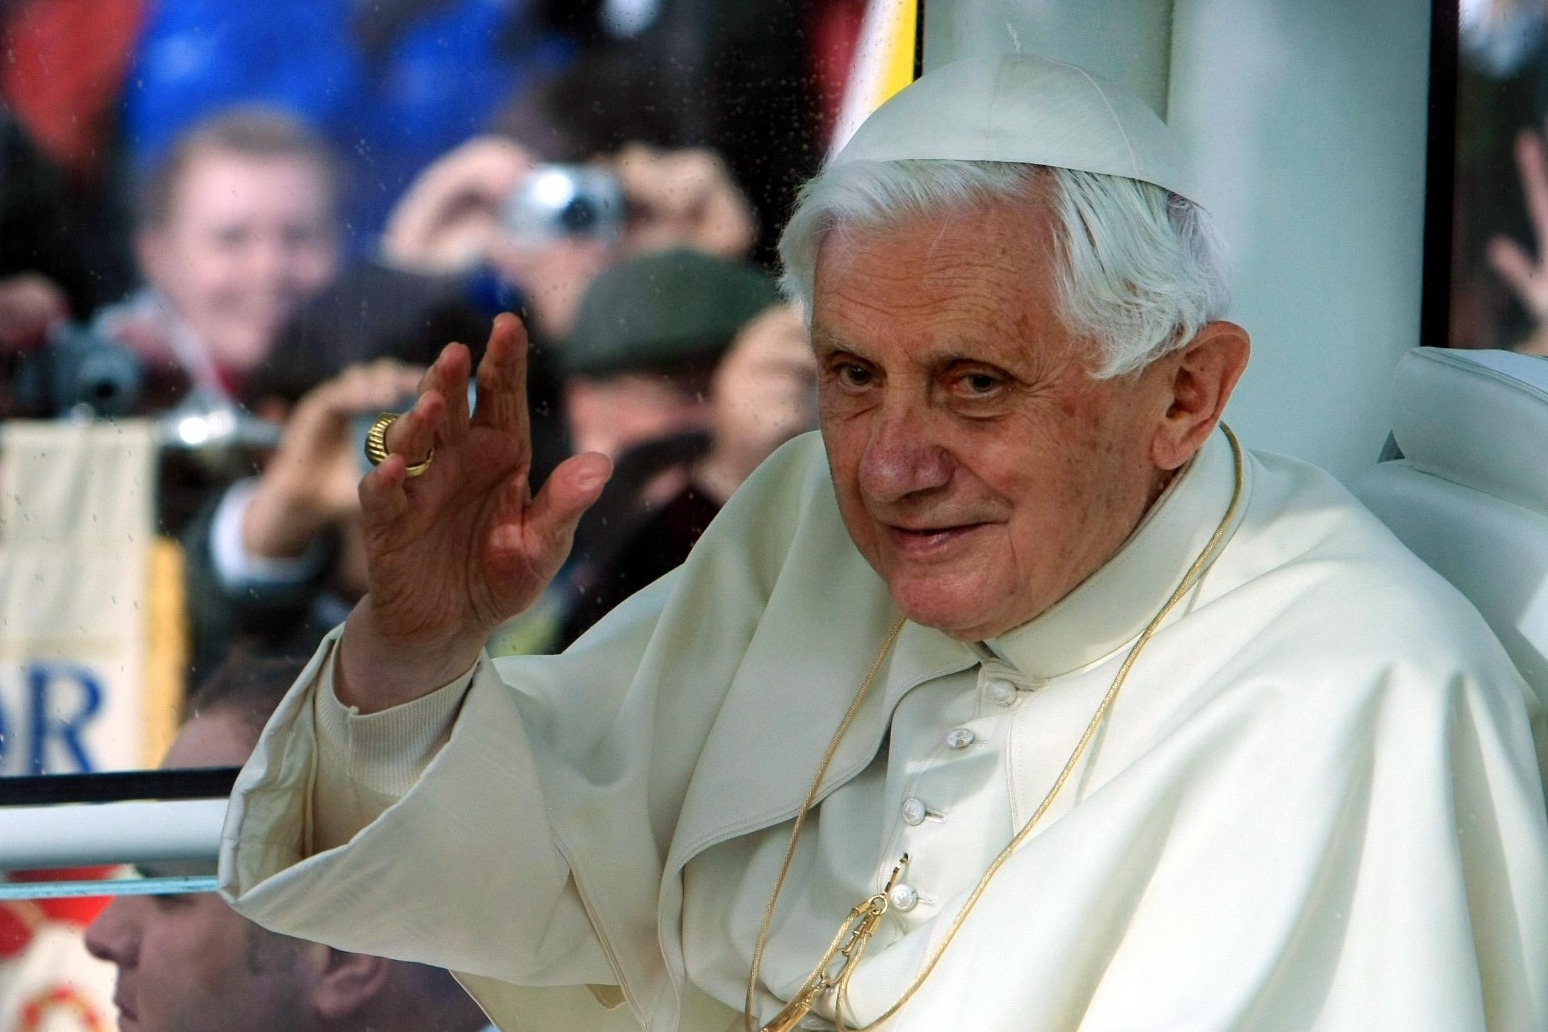 Thousands pour into St Peter’s for funeral of former Pope Benedict XVI 